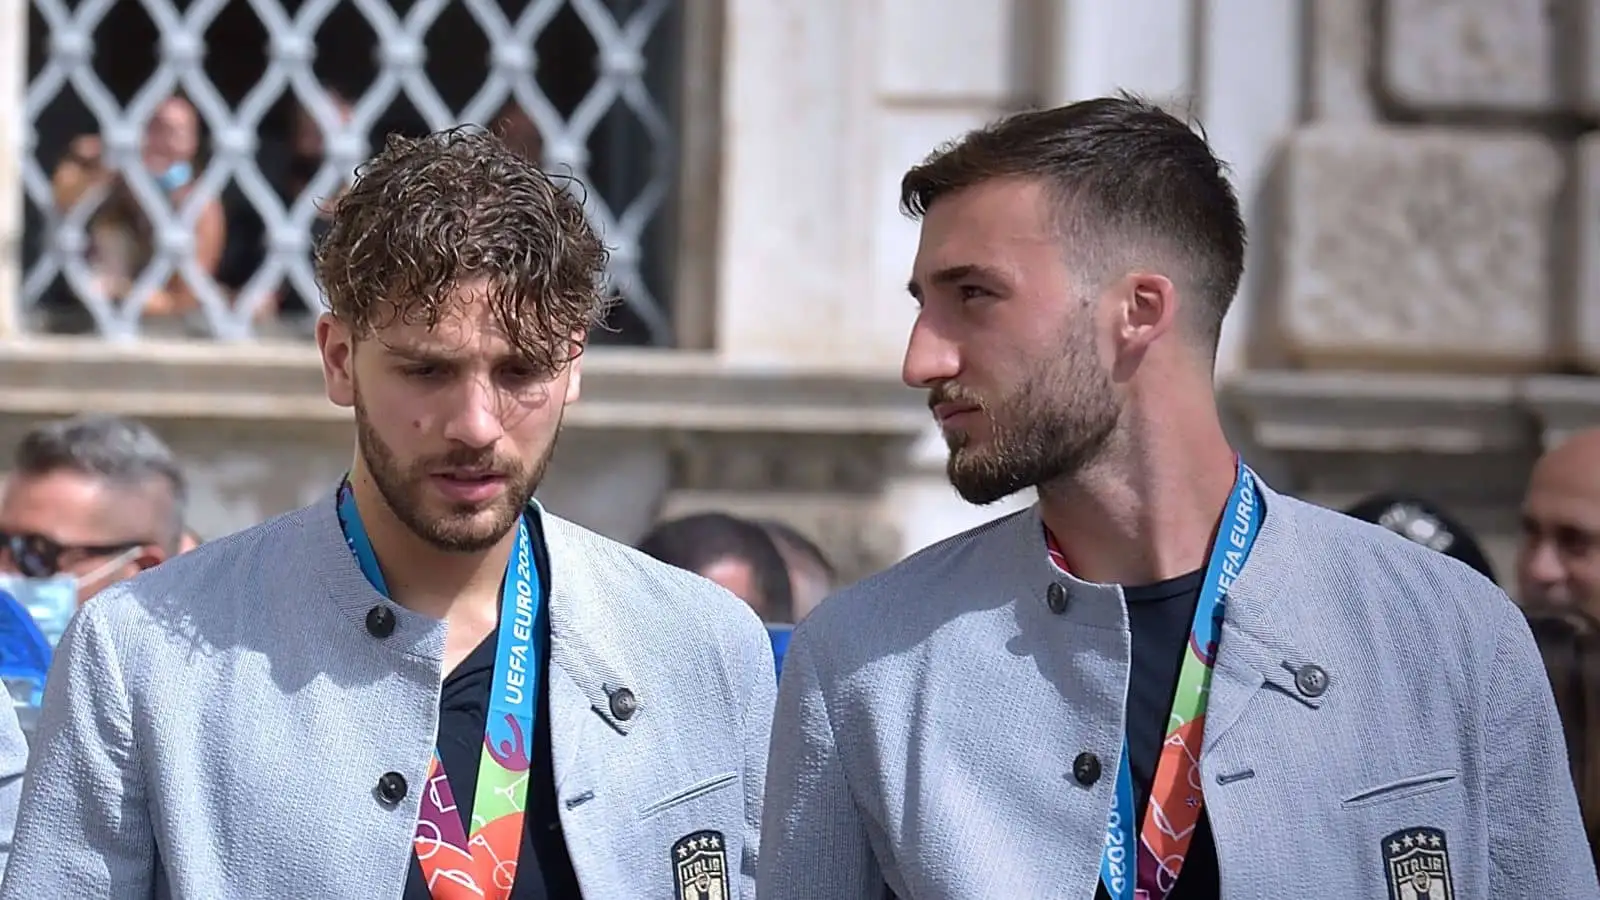 Manuel Locatelli and Bryan Cristante, Italy stars, attend the UEFA EURO 2020 trophy as players and staff of Italy's national football team arrive to attend a ceremony at the Quirinale presidential palace in Rome